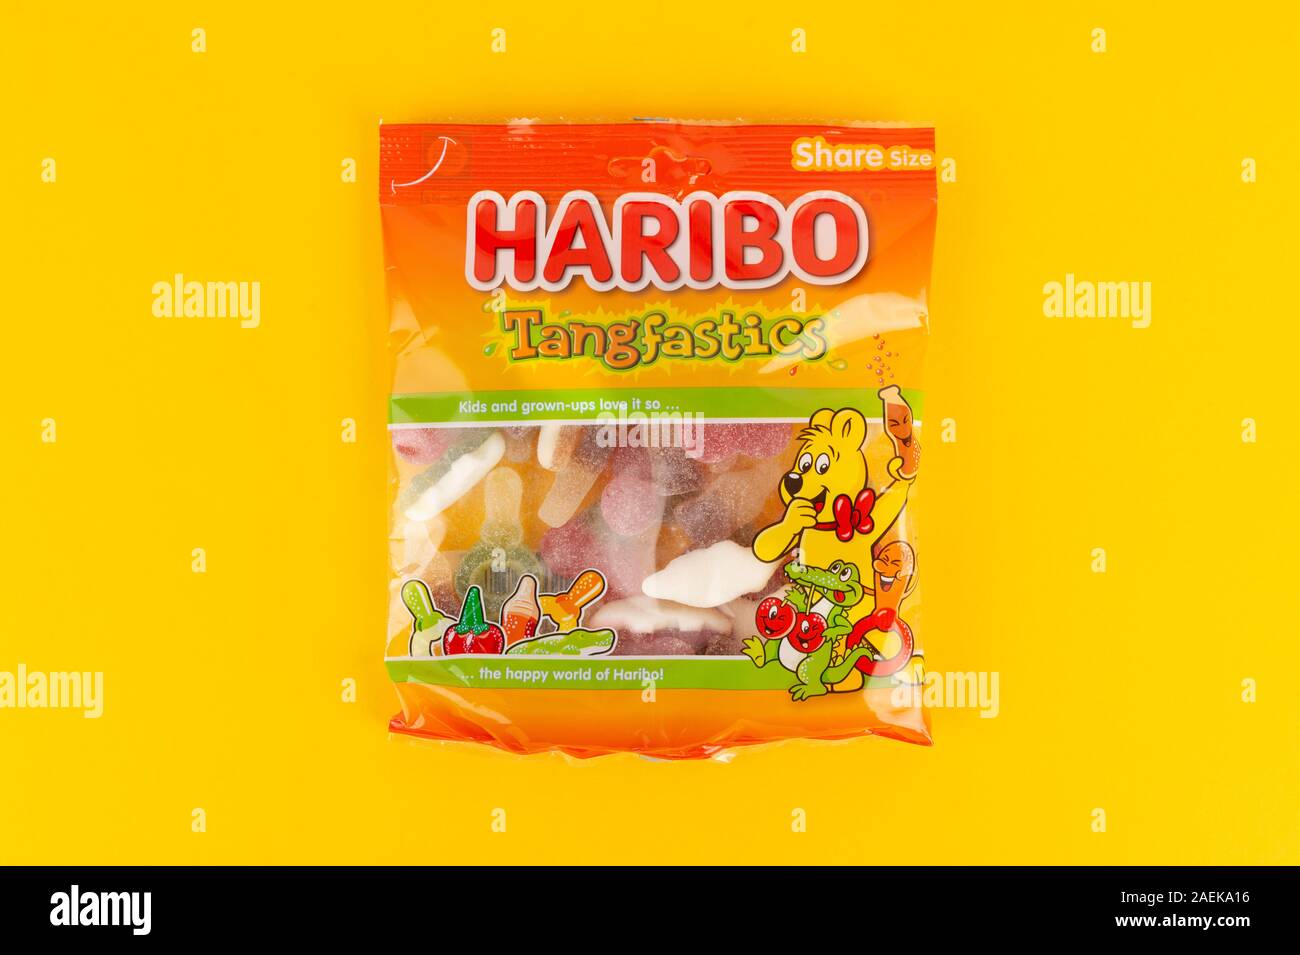 A packet of Haribo Tangfastics sweets shot on a yellow background. Stock Photo